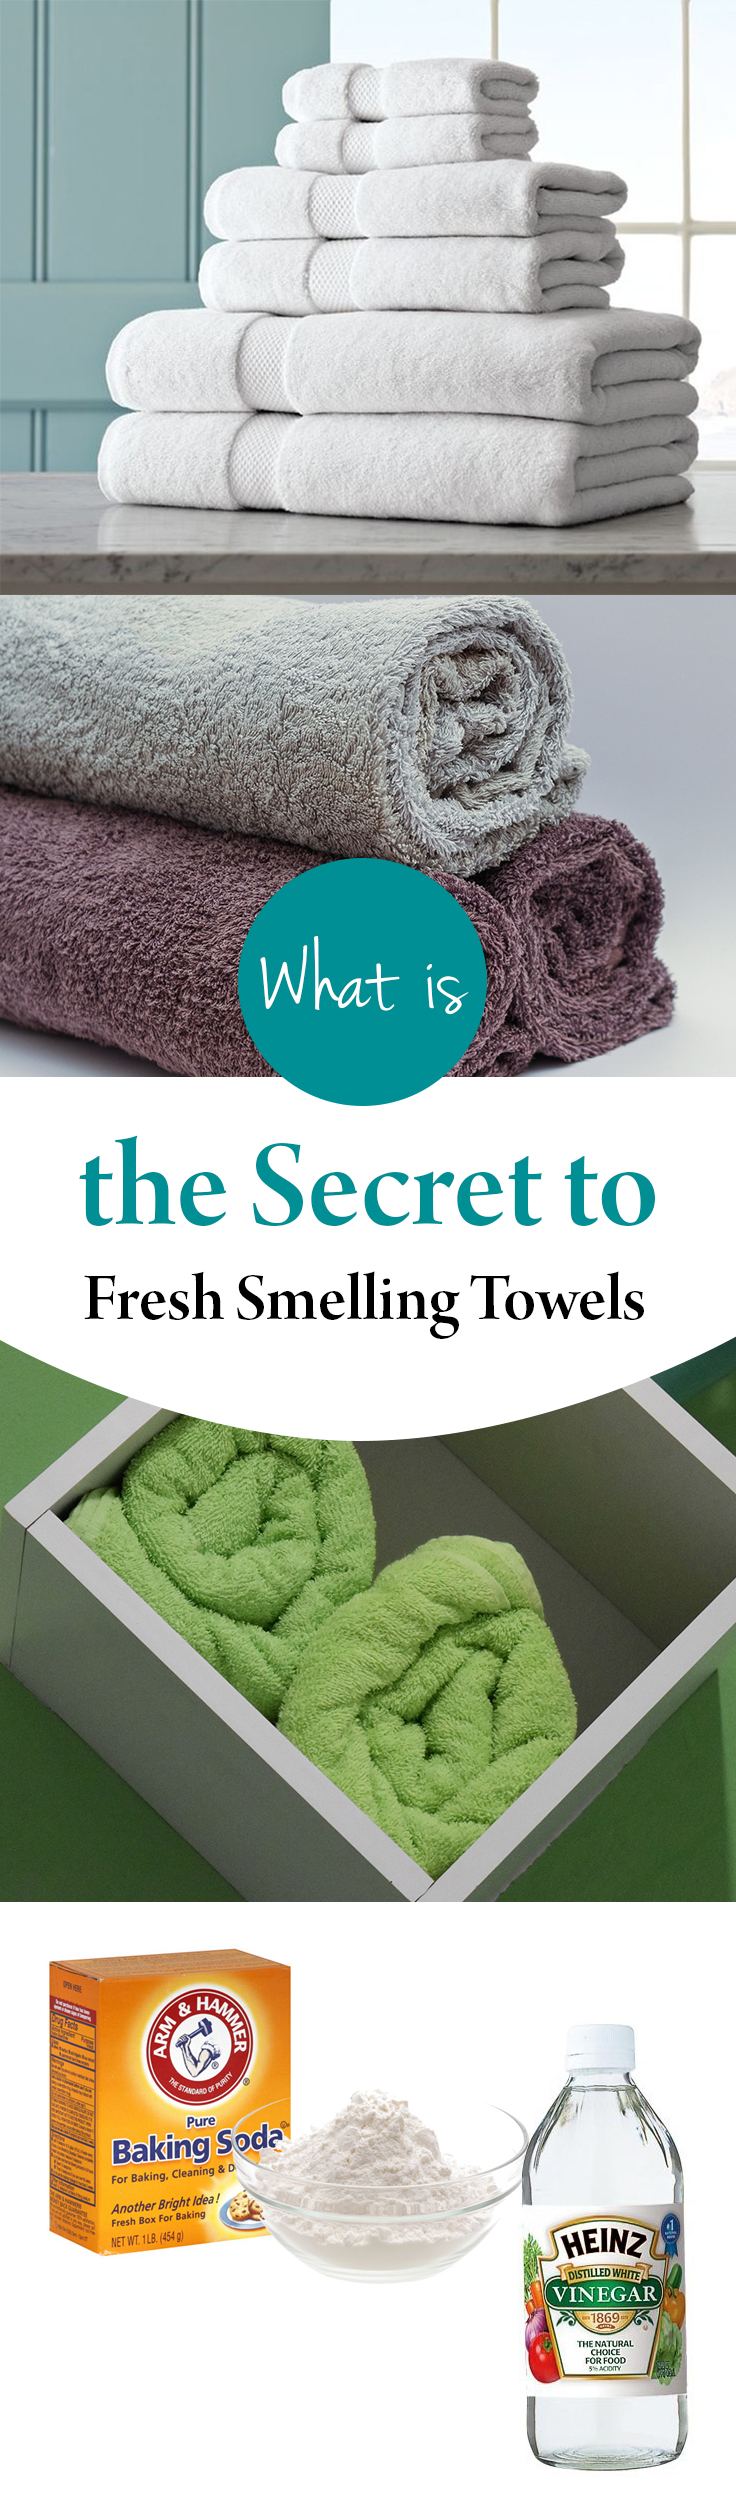 Fresh towels, how to get fresh smelling towels, towels, fresh towels, cleaning, popular pin, laundry, laundry hacks.